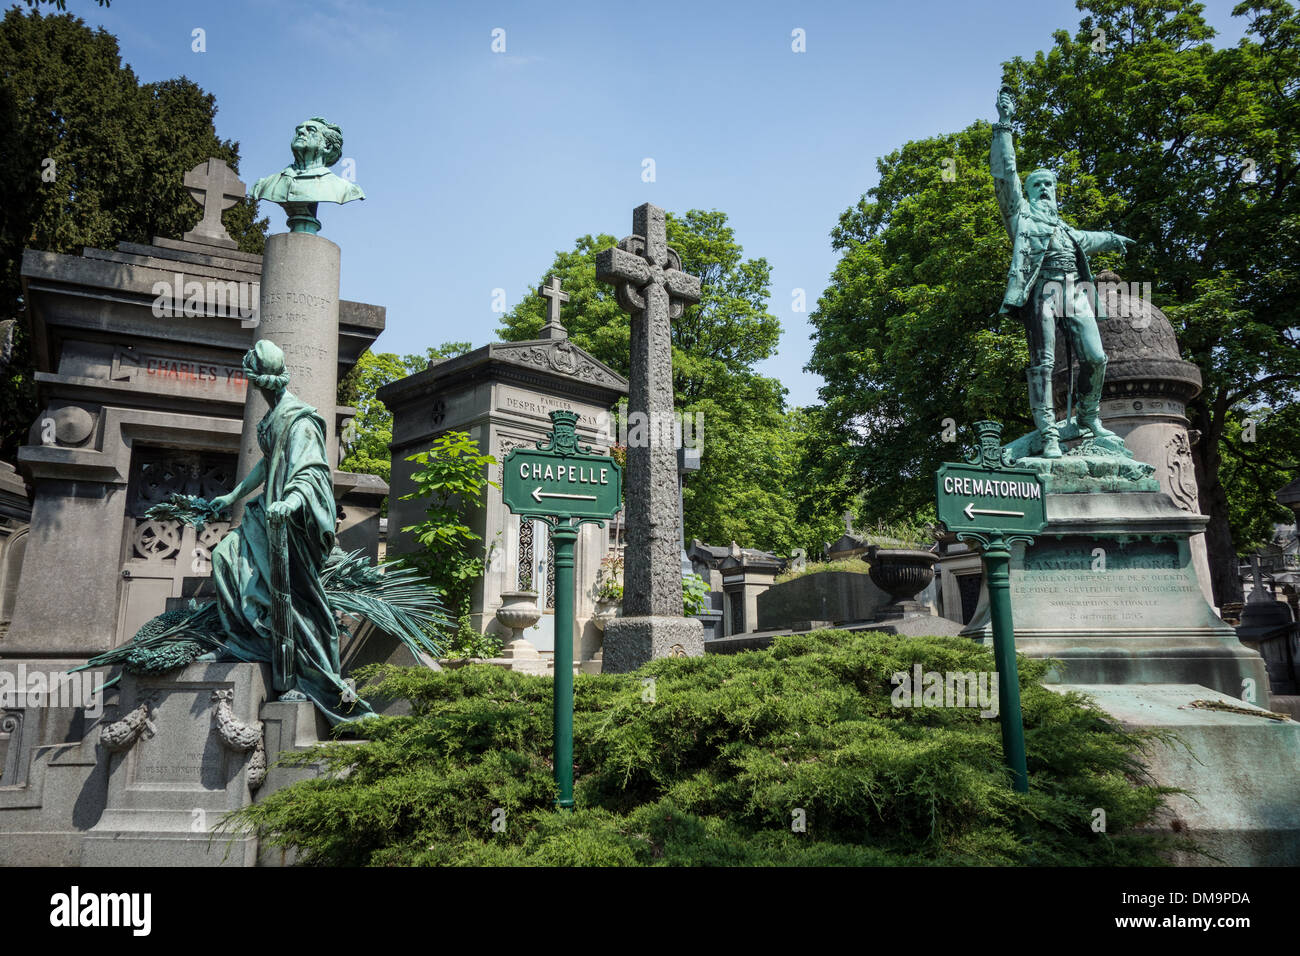 GRAVES AND BRONZES IN FRONT OF THE SIGNS FOR THE CHAPEL AND CREMATORIUM, PERE-LACHAISE CEMETERY, PARIS 20TH ARRONDISSEMENT, FRANCE Stock Photo